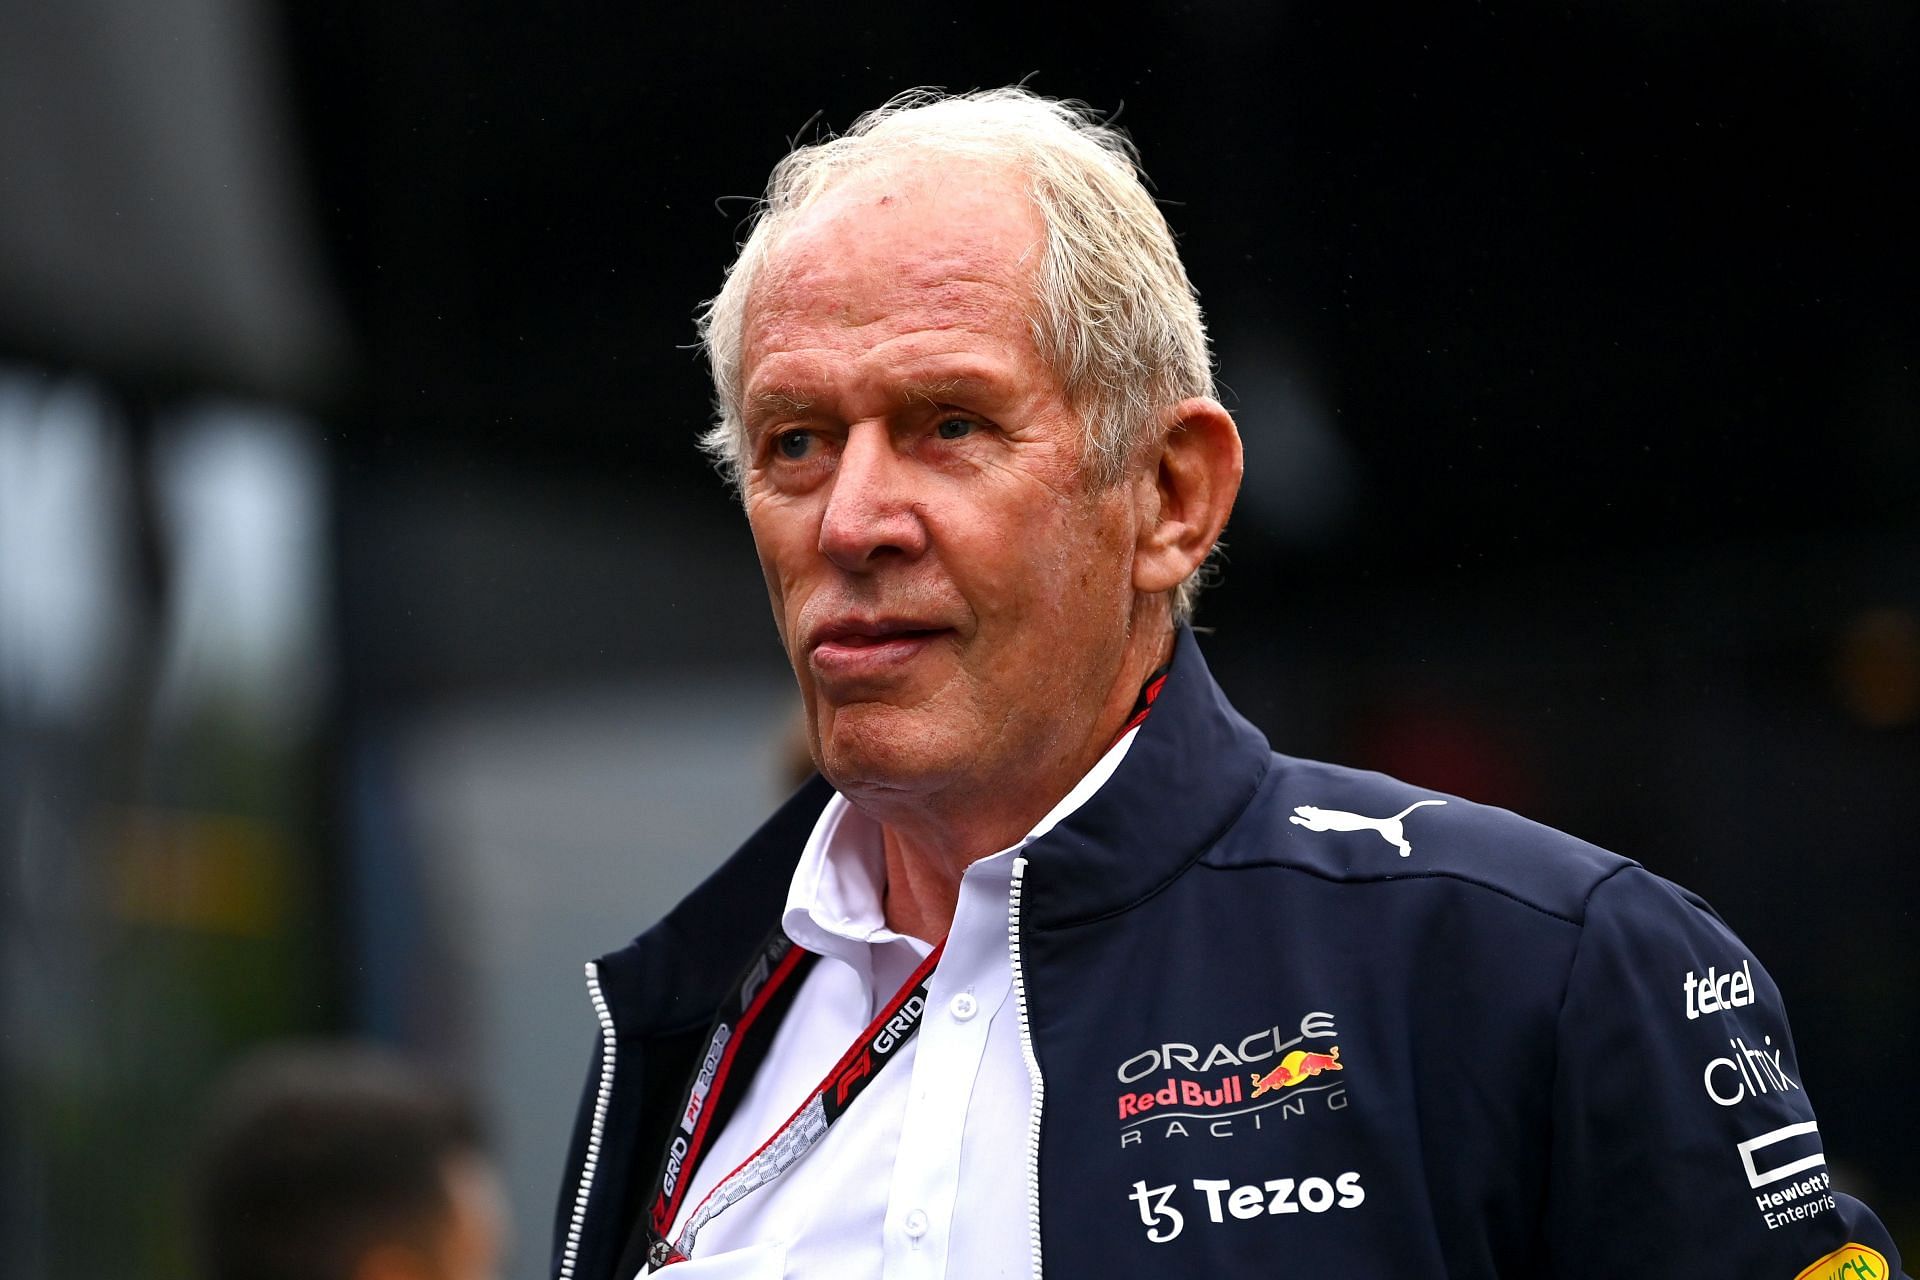 Former Red Bull driver academy reject speaks out in support of Helmut Marko